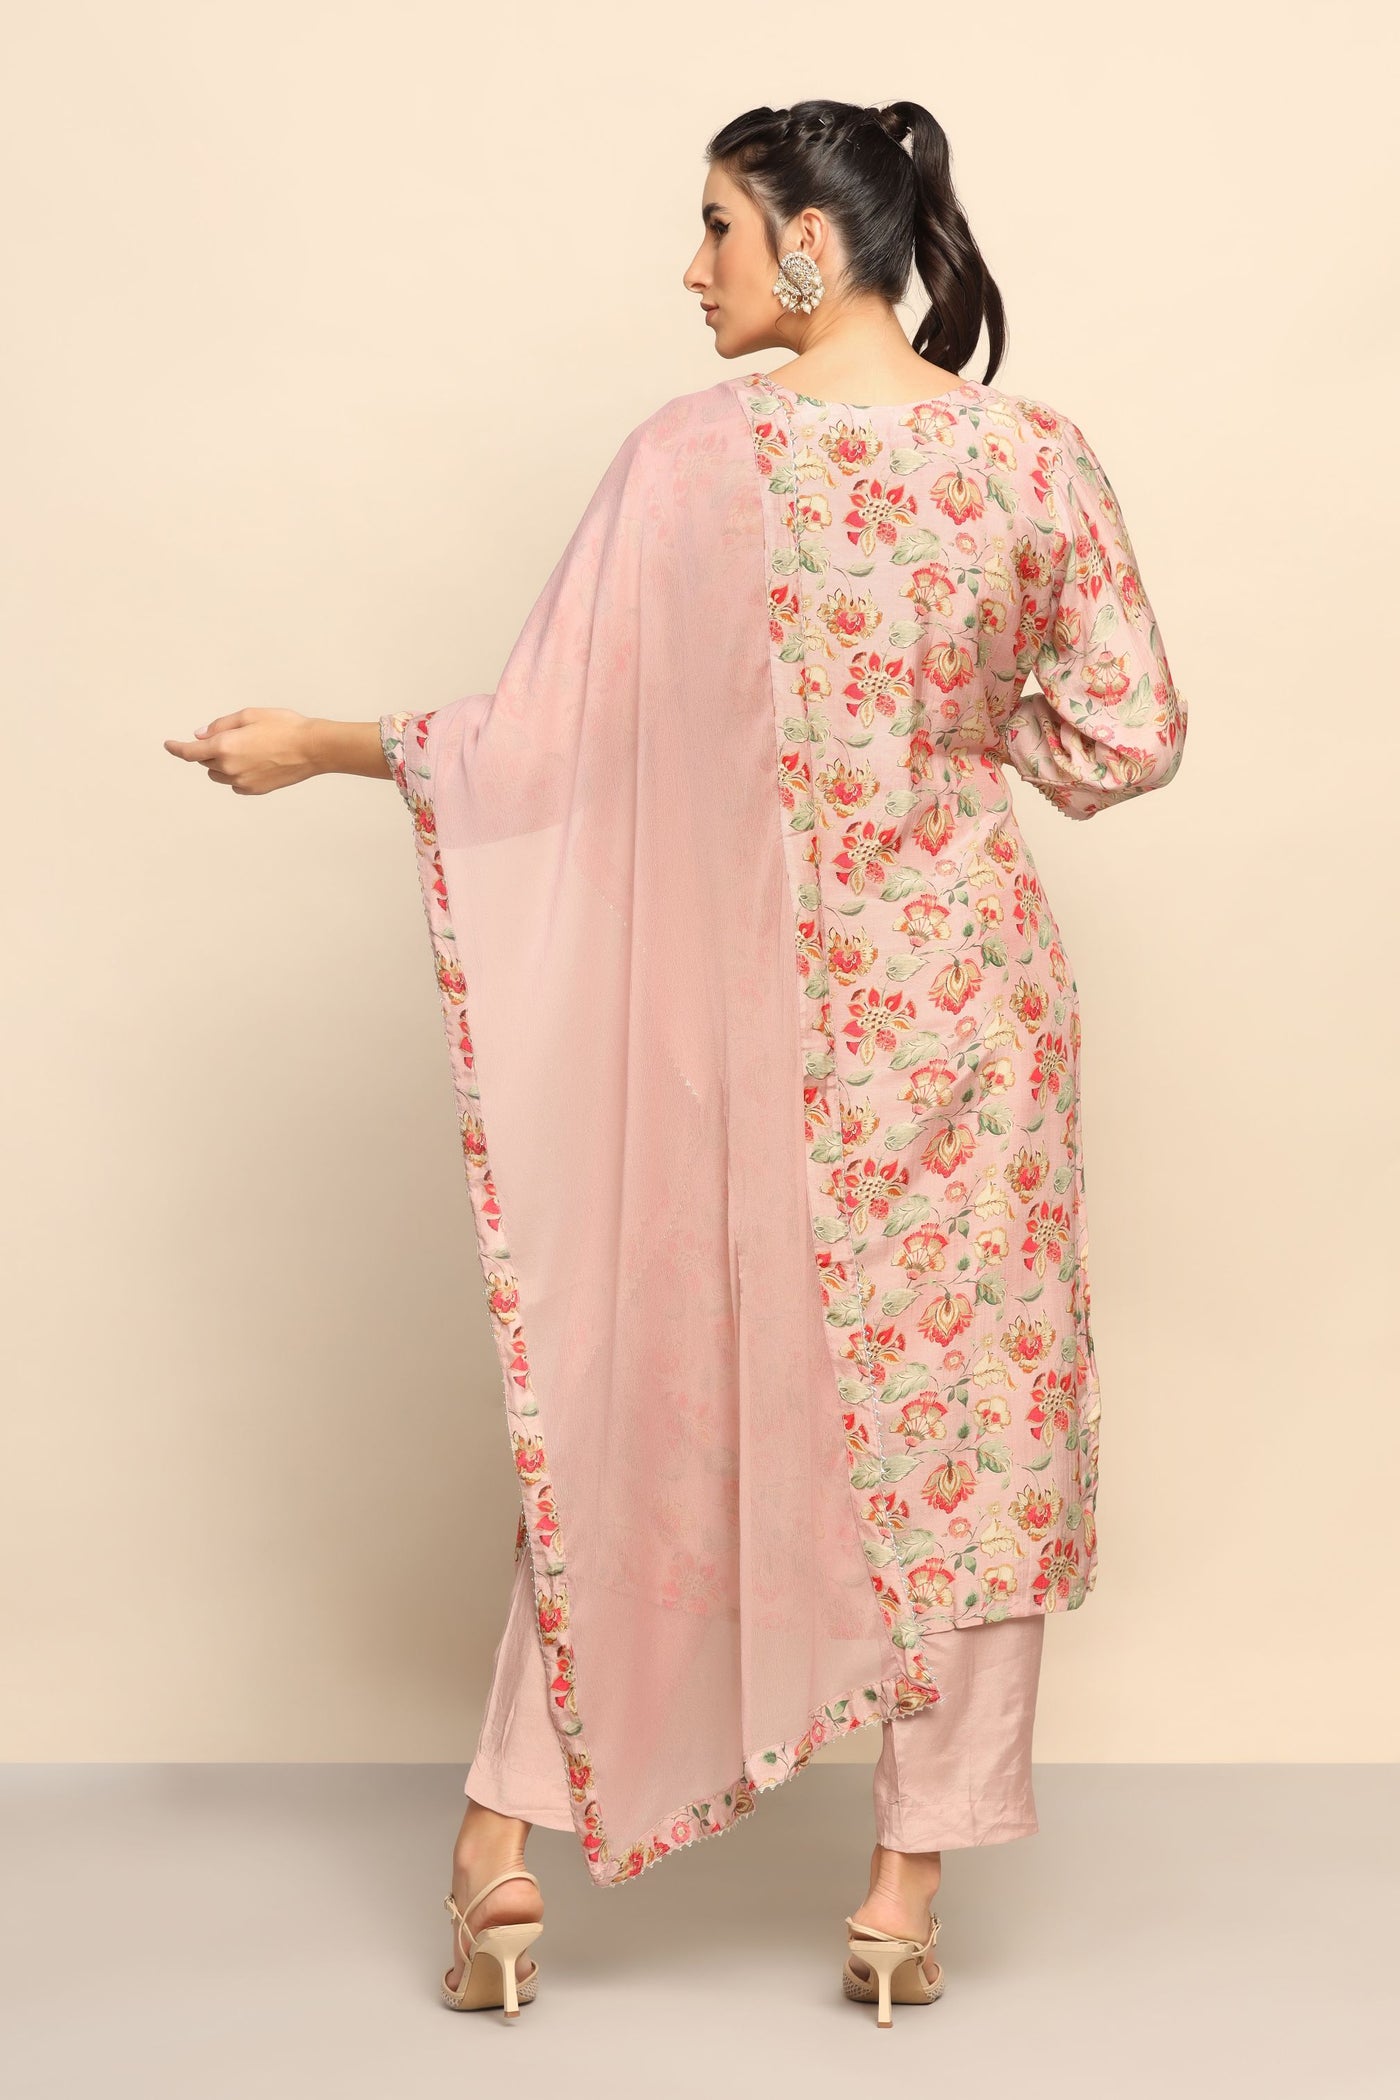 Enchanting Light Pink Suit with Foil Mirror, Dabka, and Beads